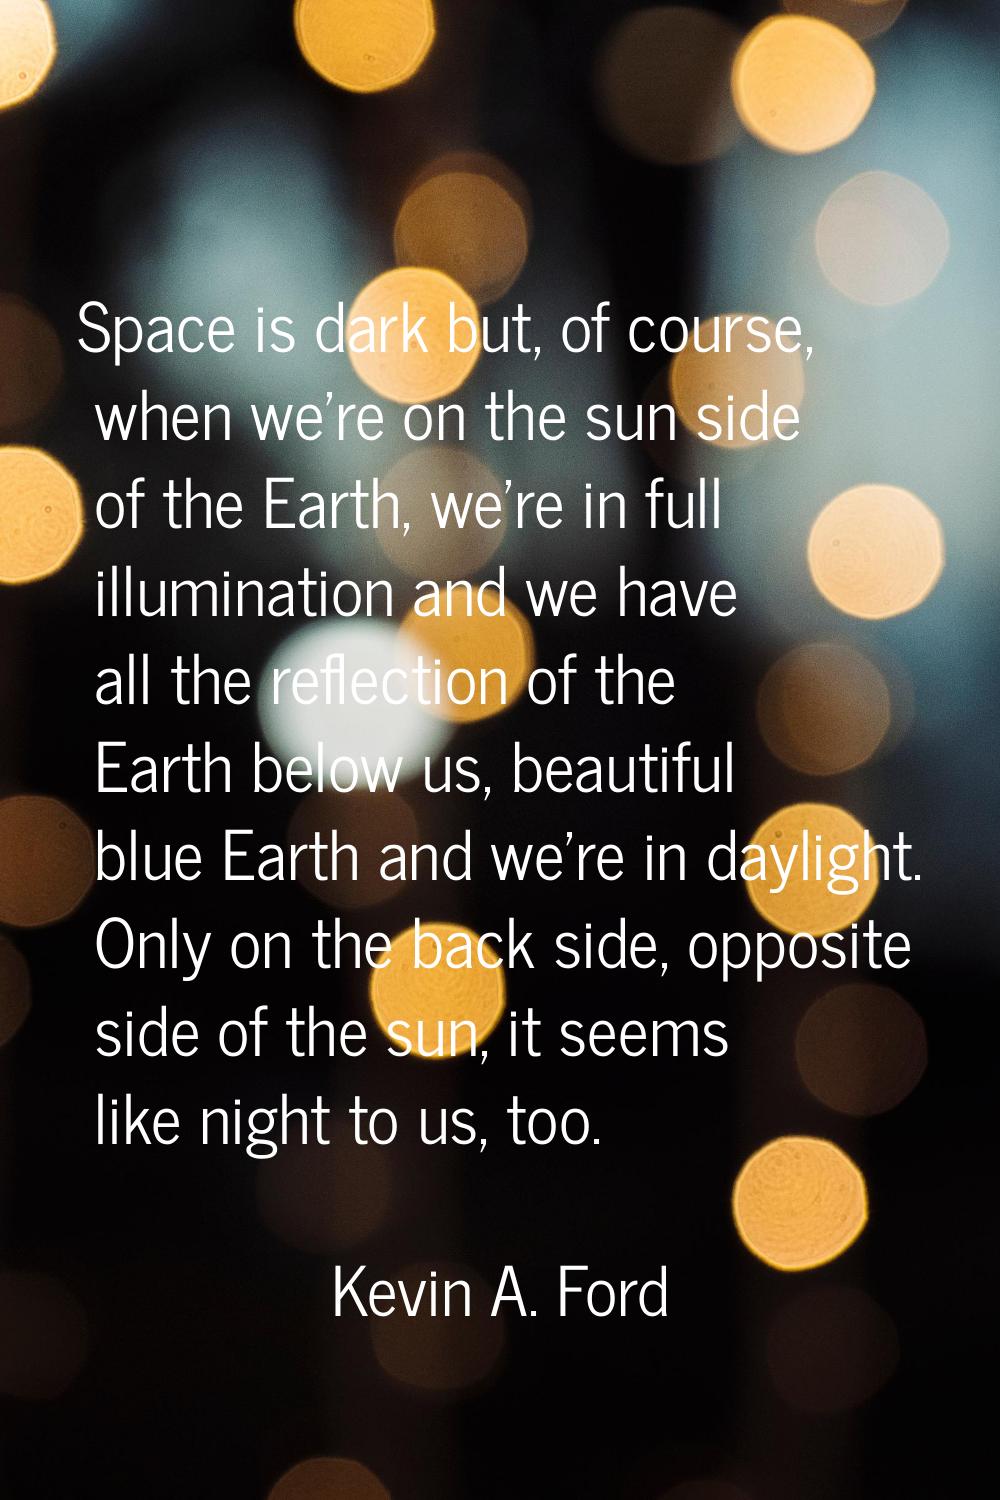 Space is dark but, of course, when we're on the sun side of the Earth, we're in full illumination a